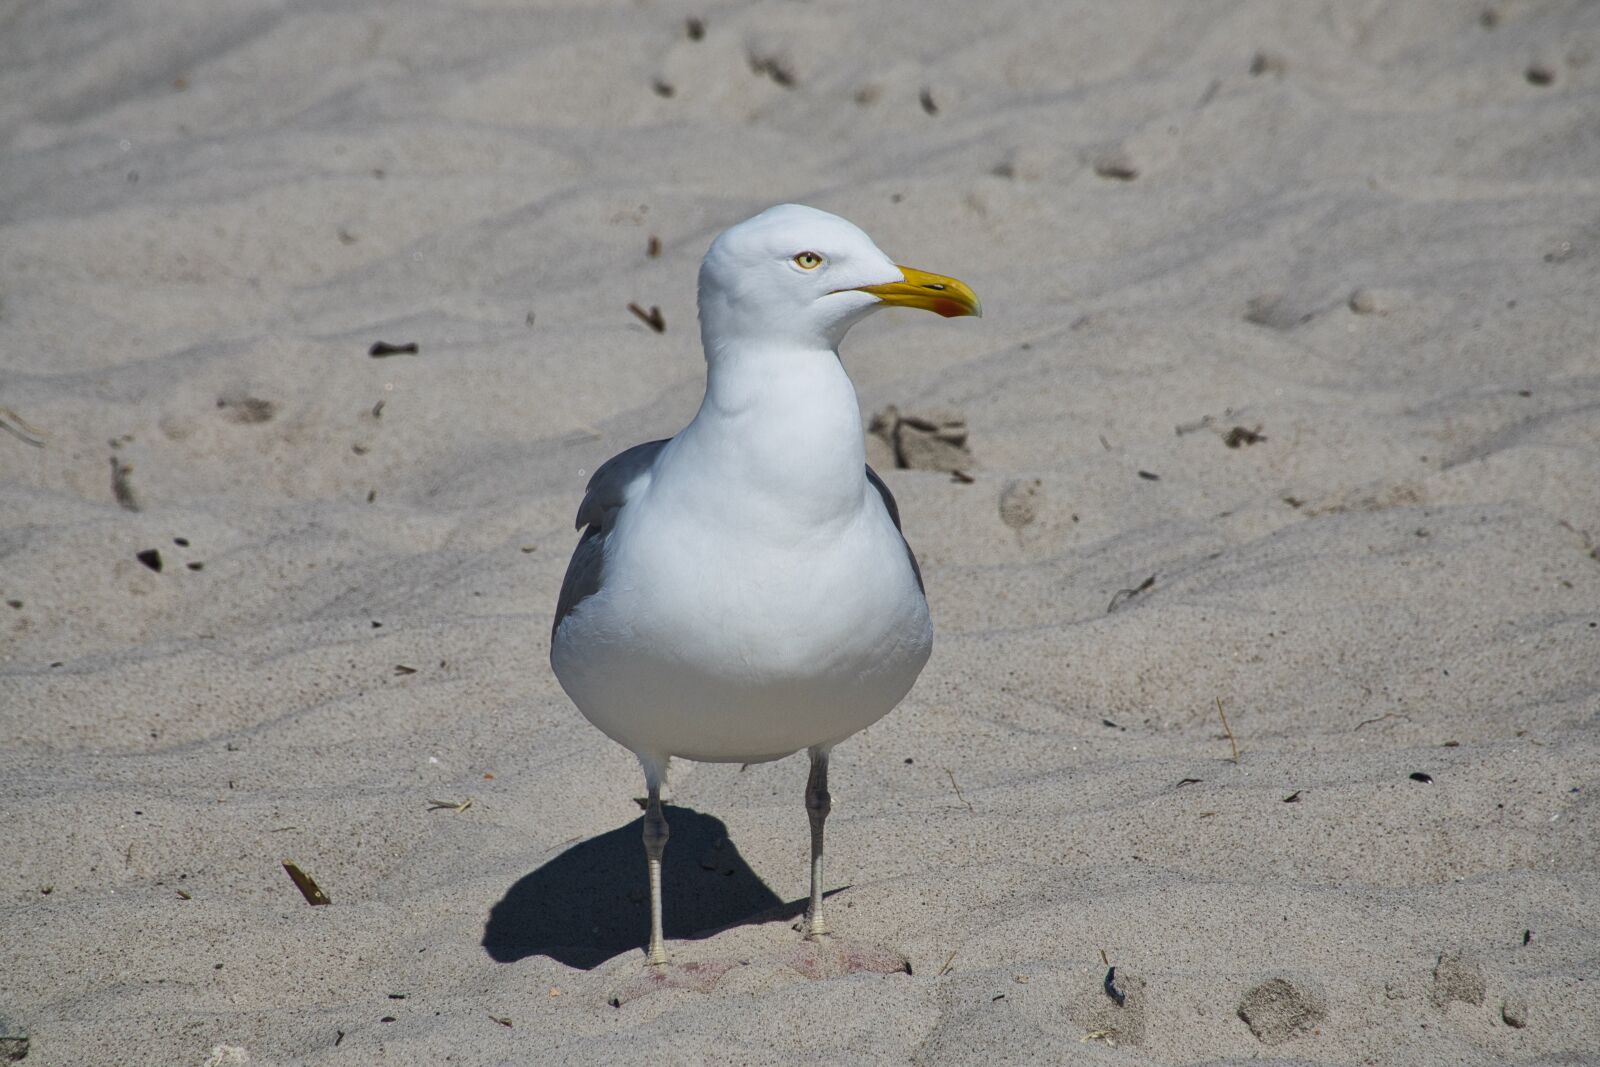 Sony Cyber-shot DSC-RX10 III sample photo. Seagull, beach, vacations photography